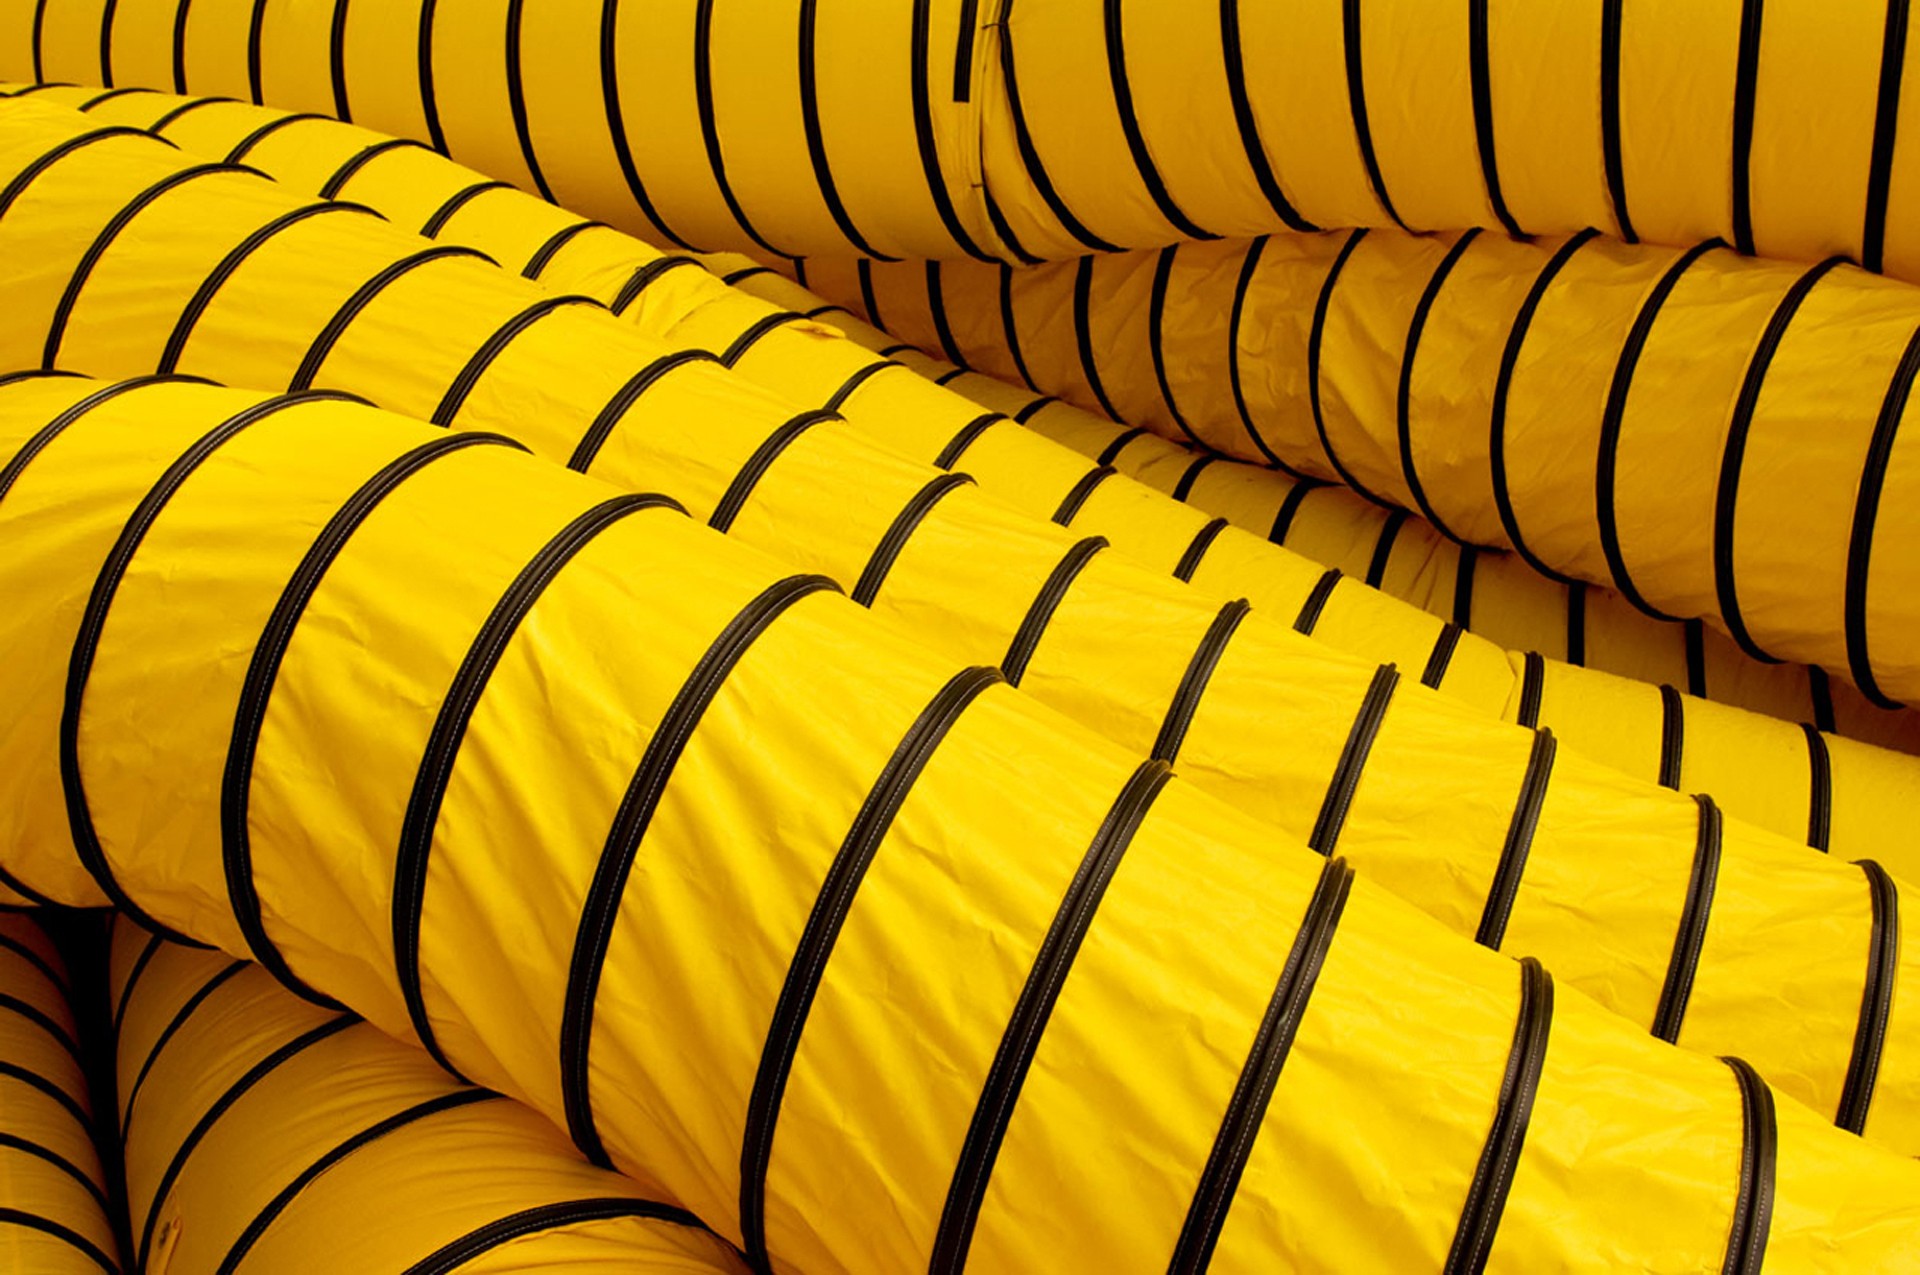 Hose Yellow Pipe 1920x1275